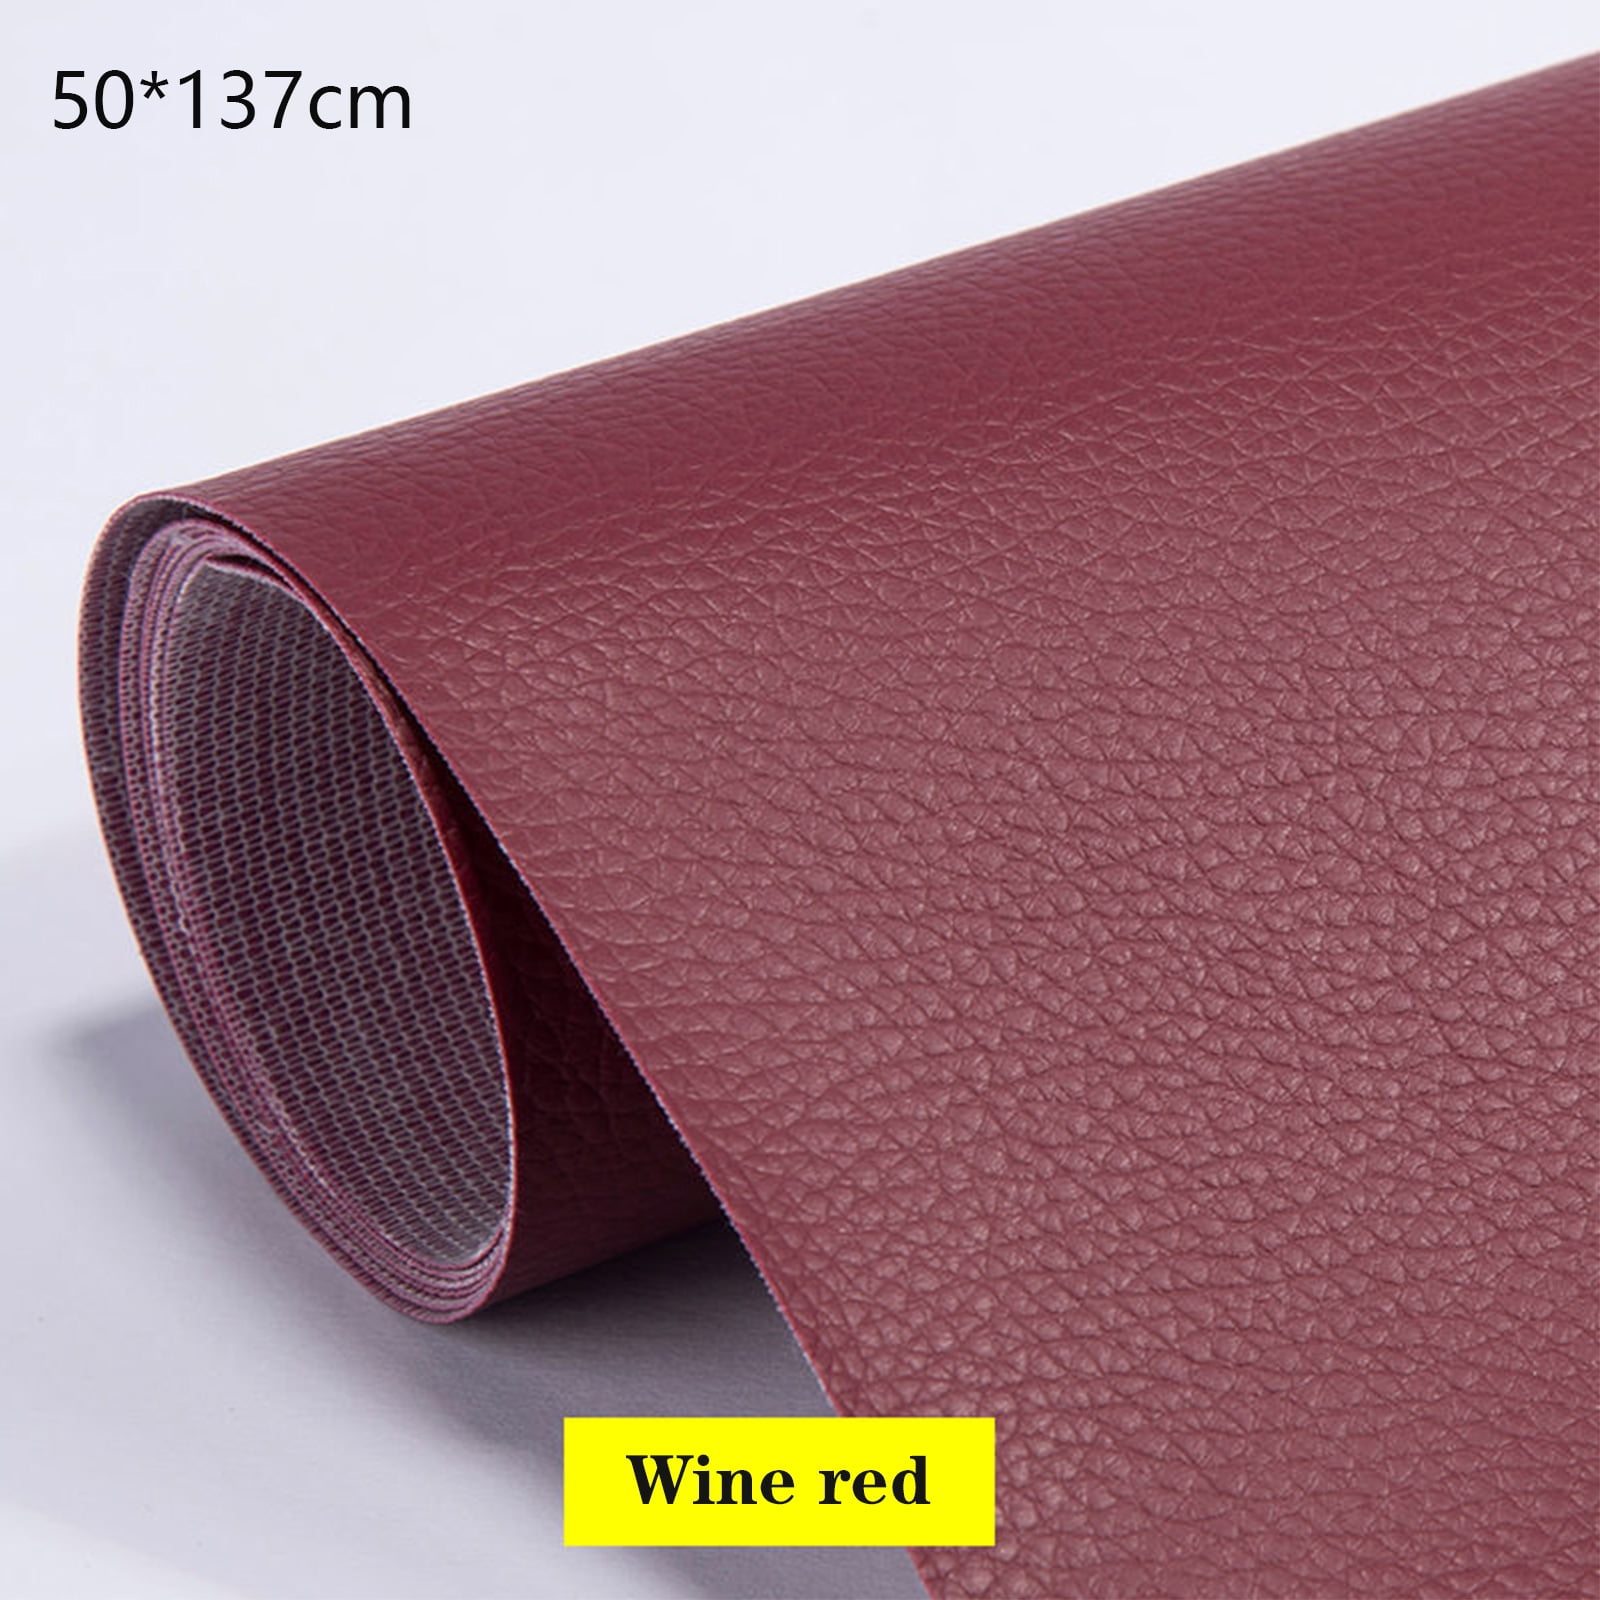 WANGYUXIN Leather Repair Patch,Leather Repair Patch,Self-Adhesive Leather  Refinisher Cuttable Sofa Repair Patch,Orange,200x138cm/78.7x54.3in